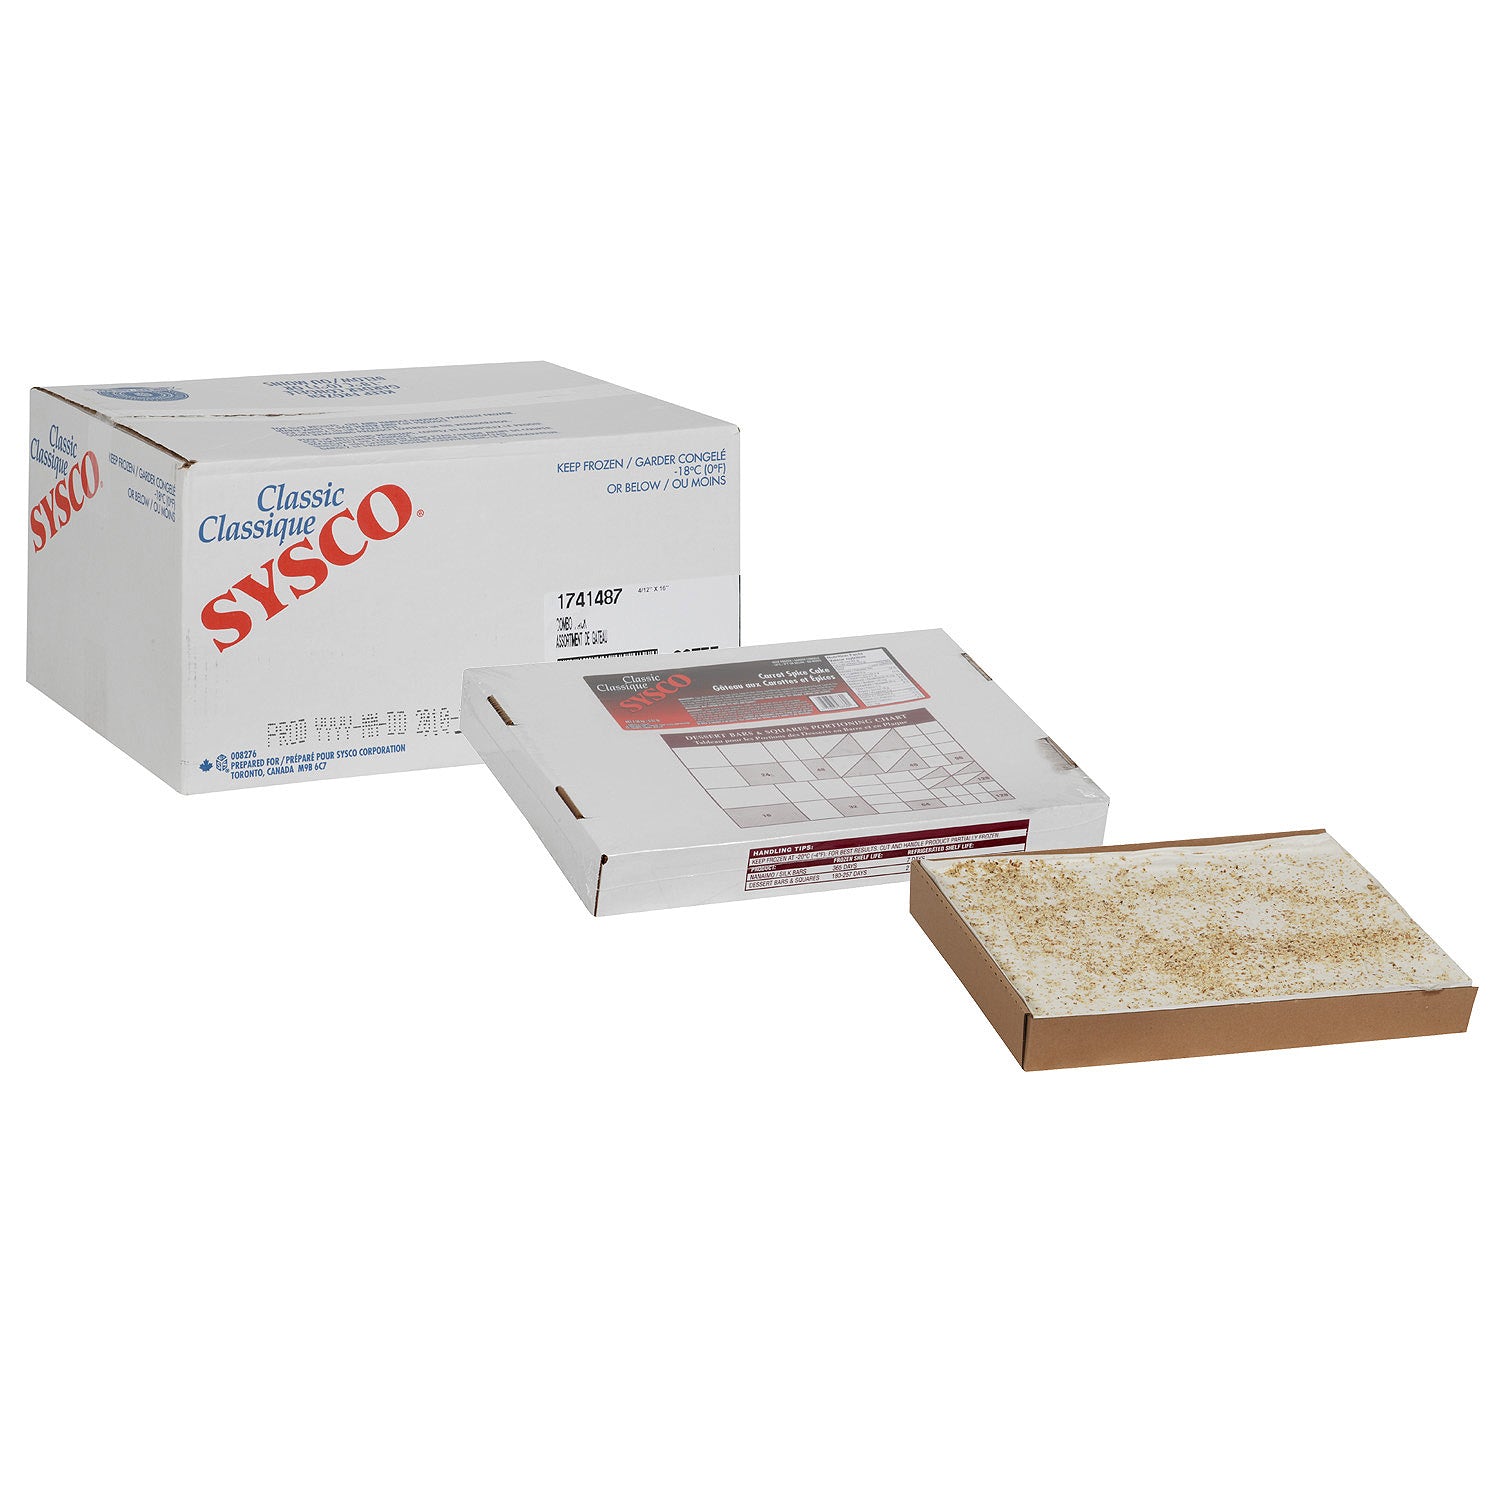 Sysco Classic Assorted Sheet Cakes 4ct [$0.47/serving]